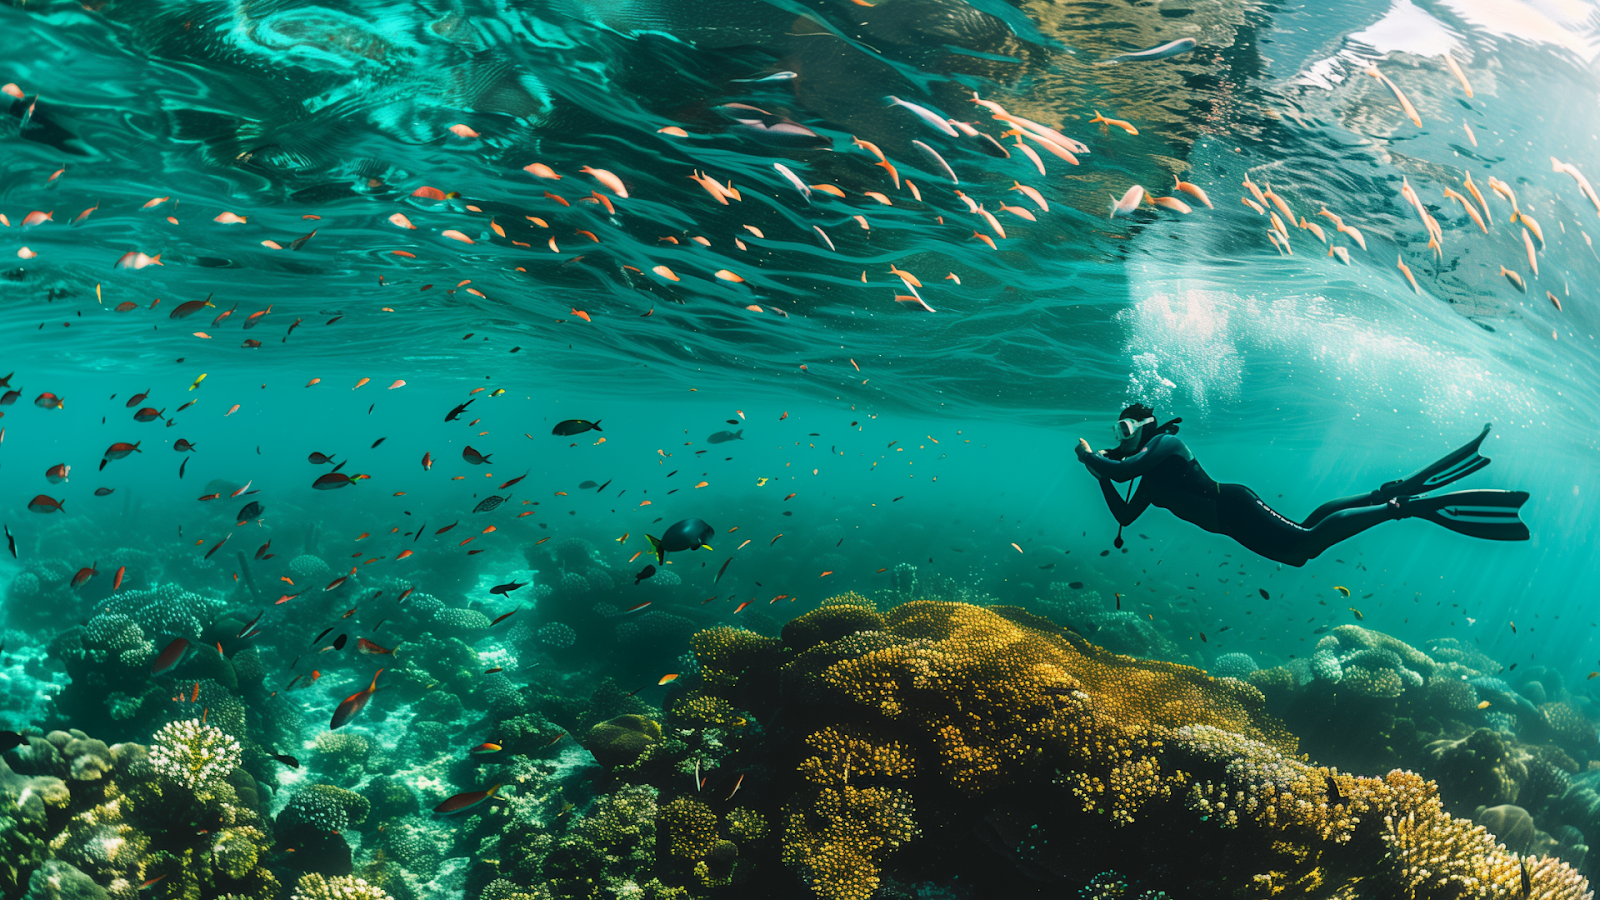 Snorkeler in Cabo Pulmo National Park, surrounded by coral reefs and tropical fish, with clear turquoise water above.